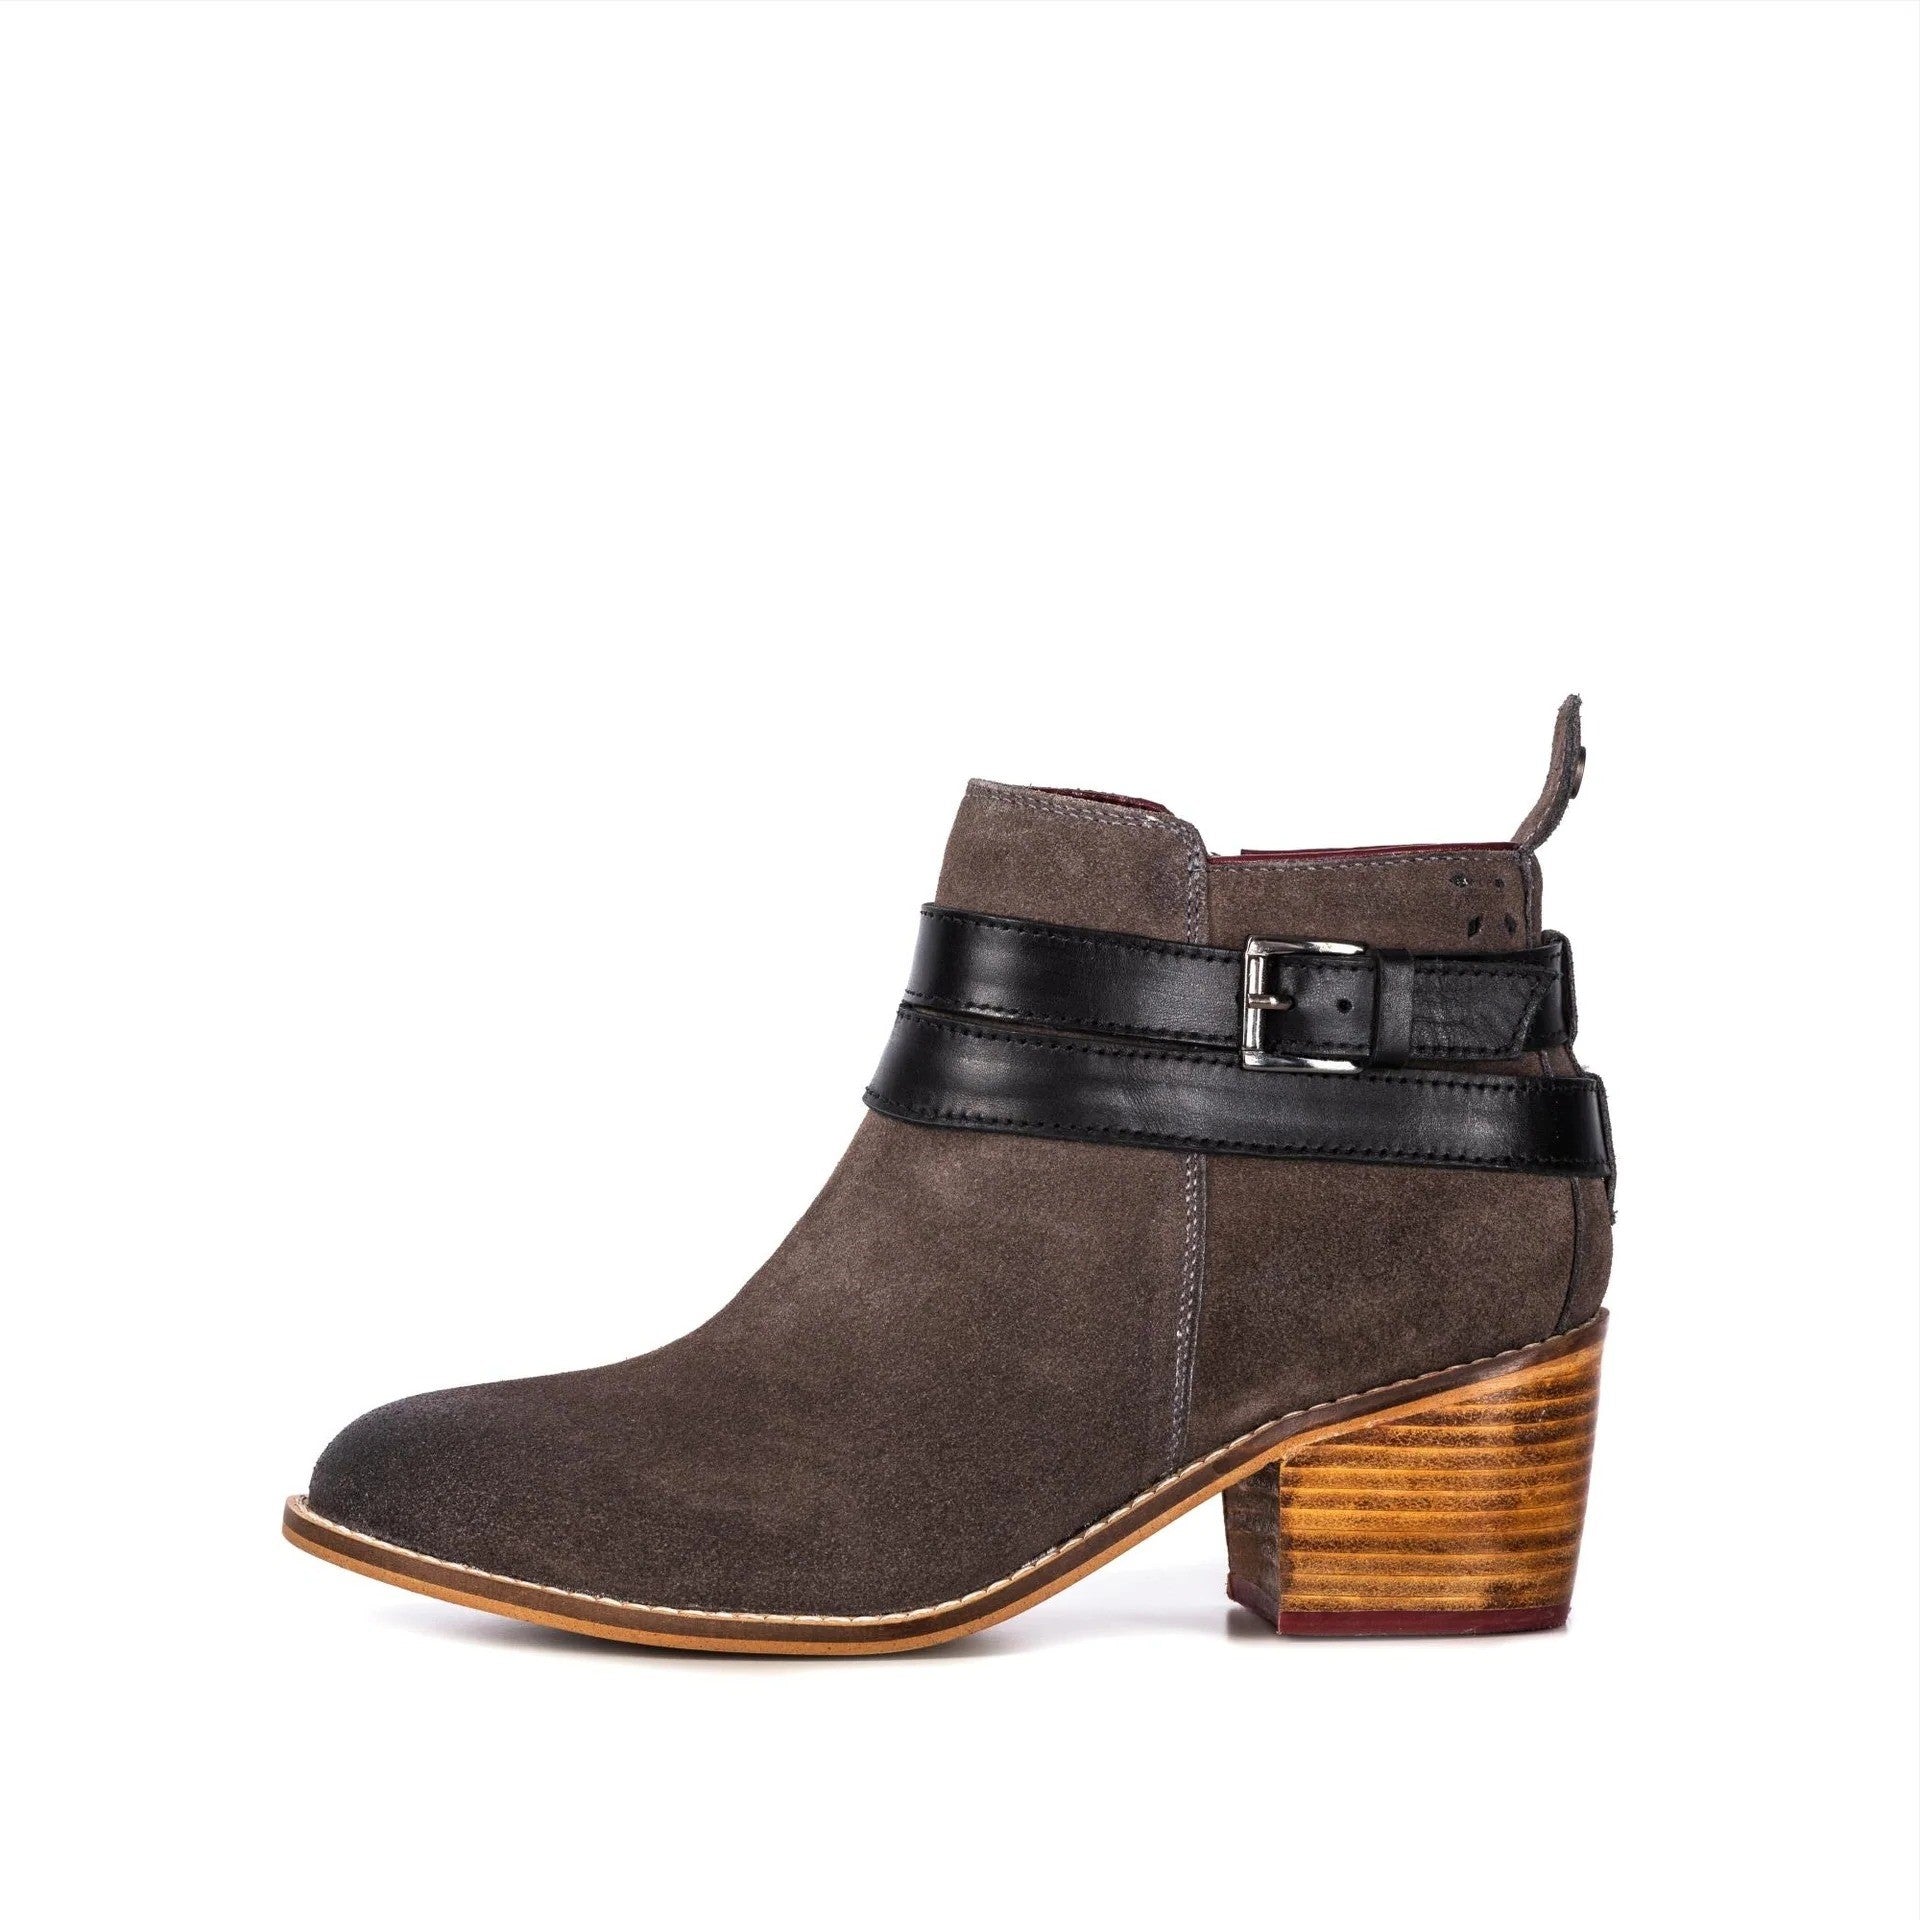 LADIES LILY GREY SUEDE STRAP BOOT